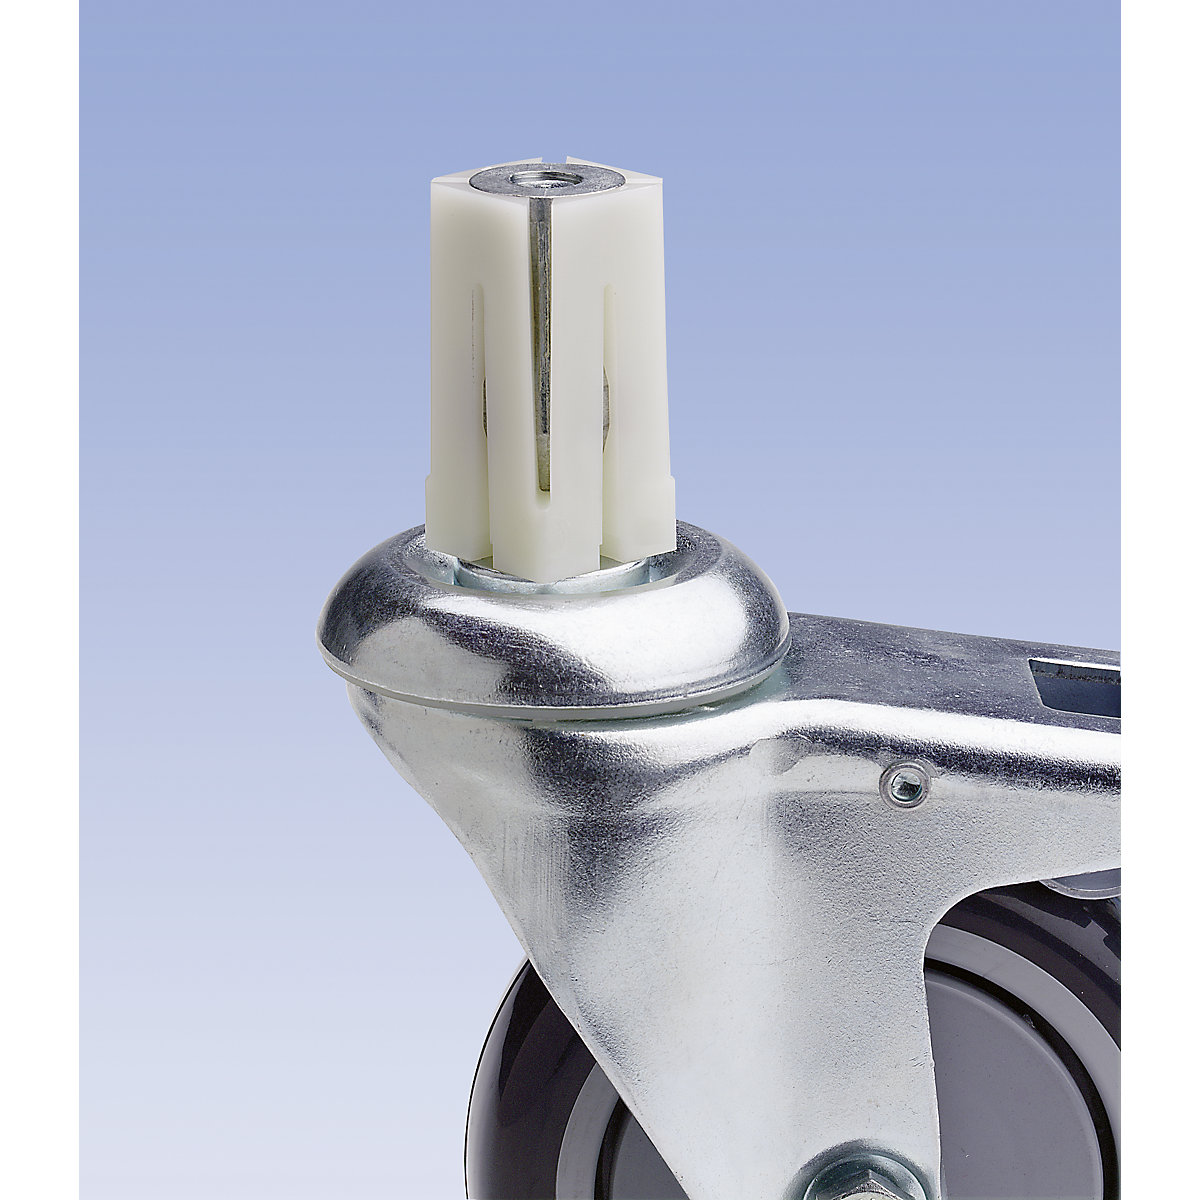 Expander tube fitting – Proroll